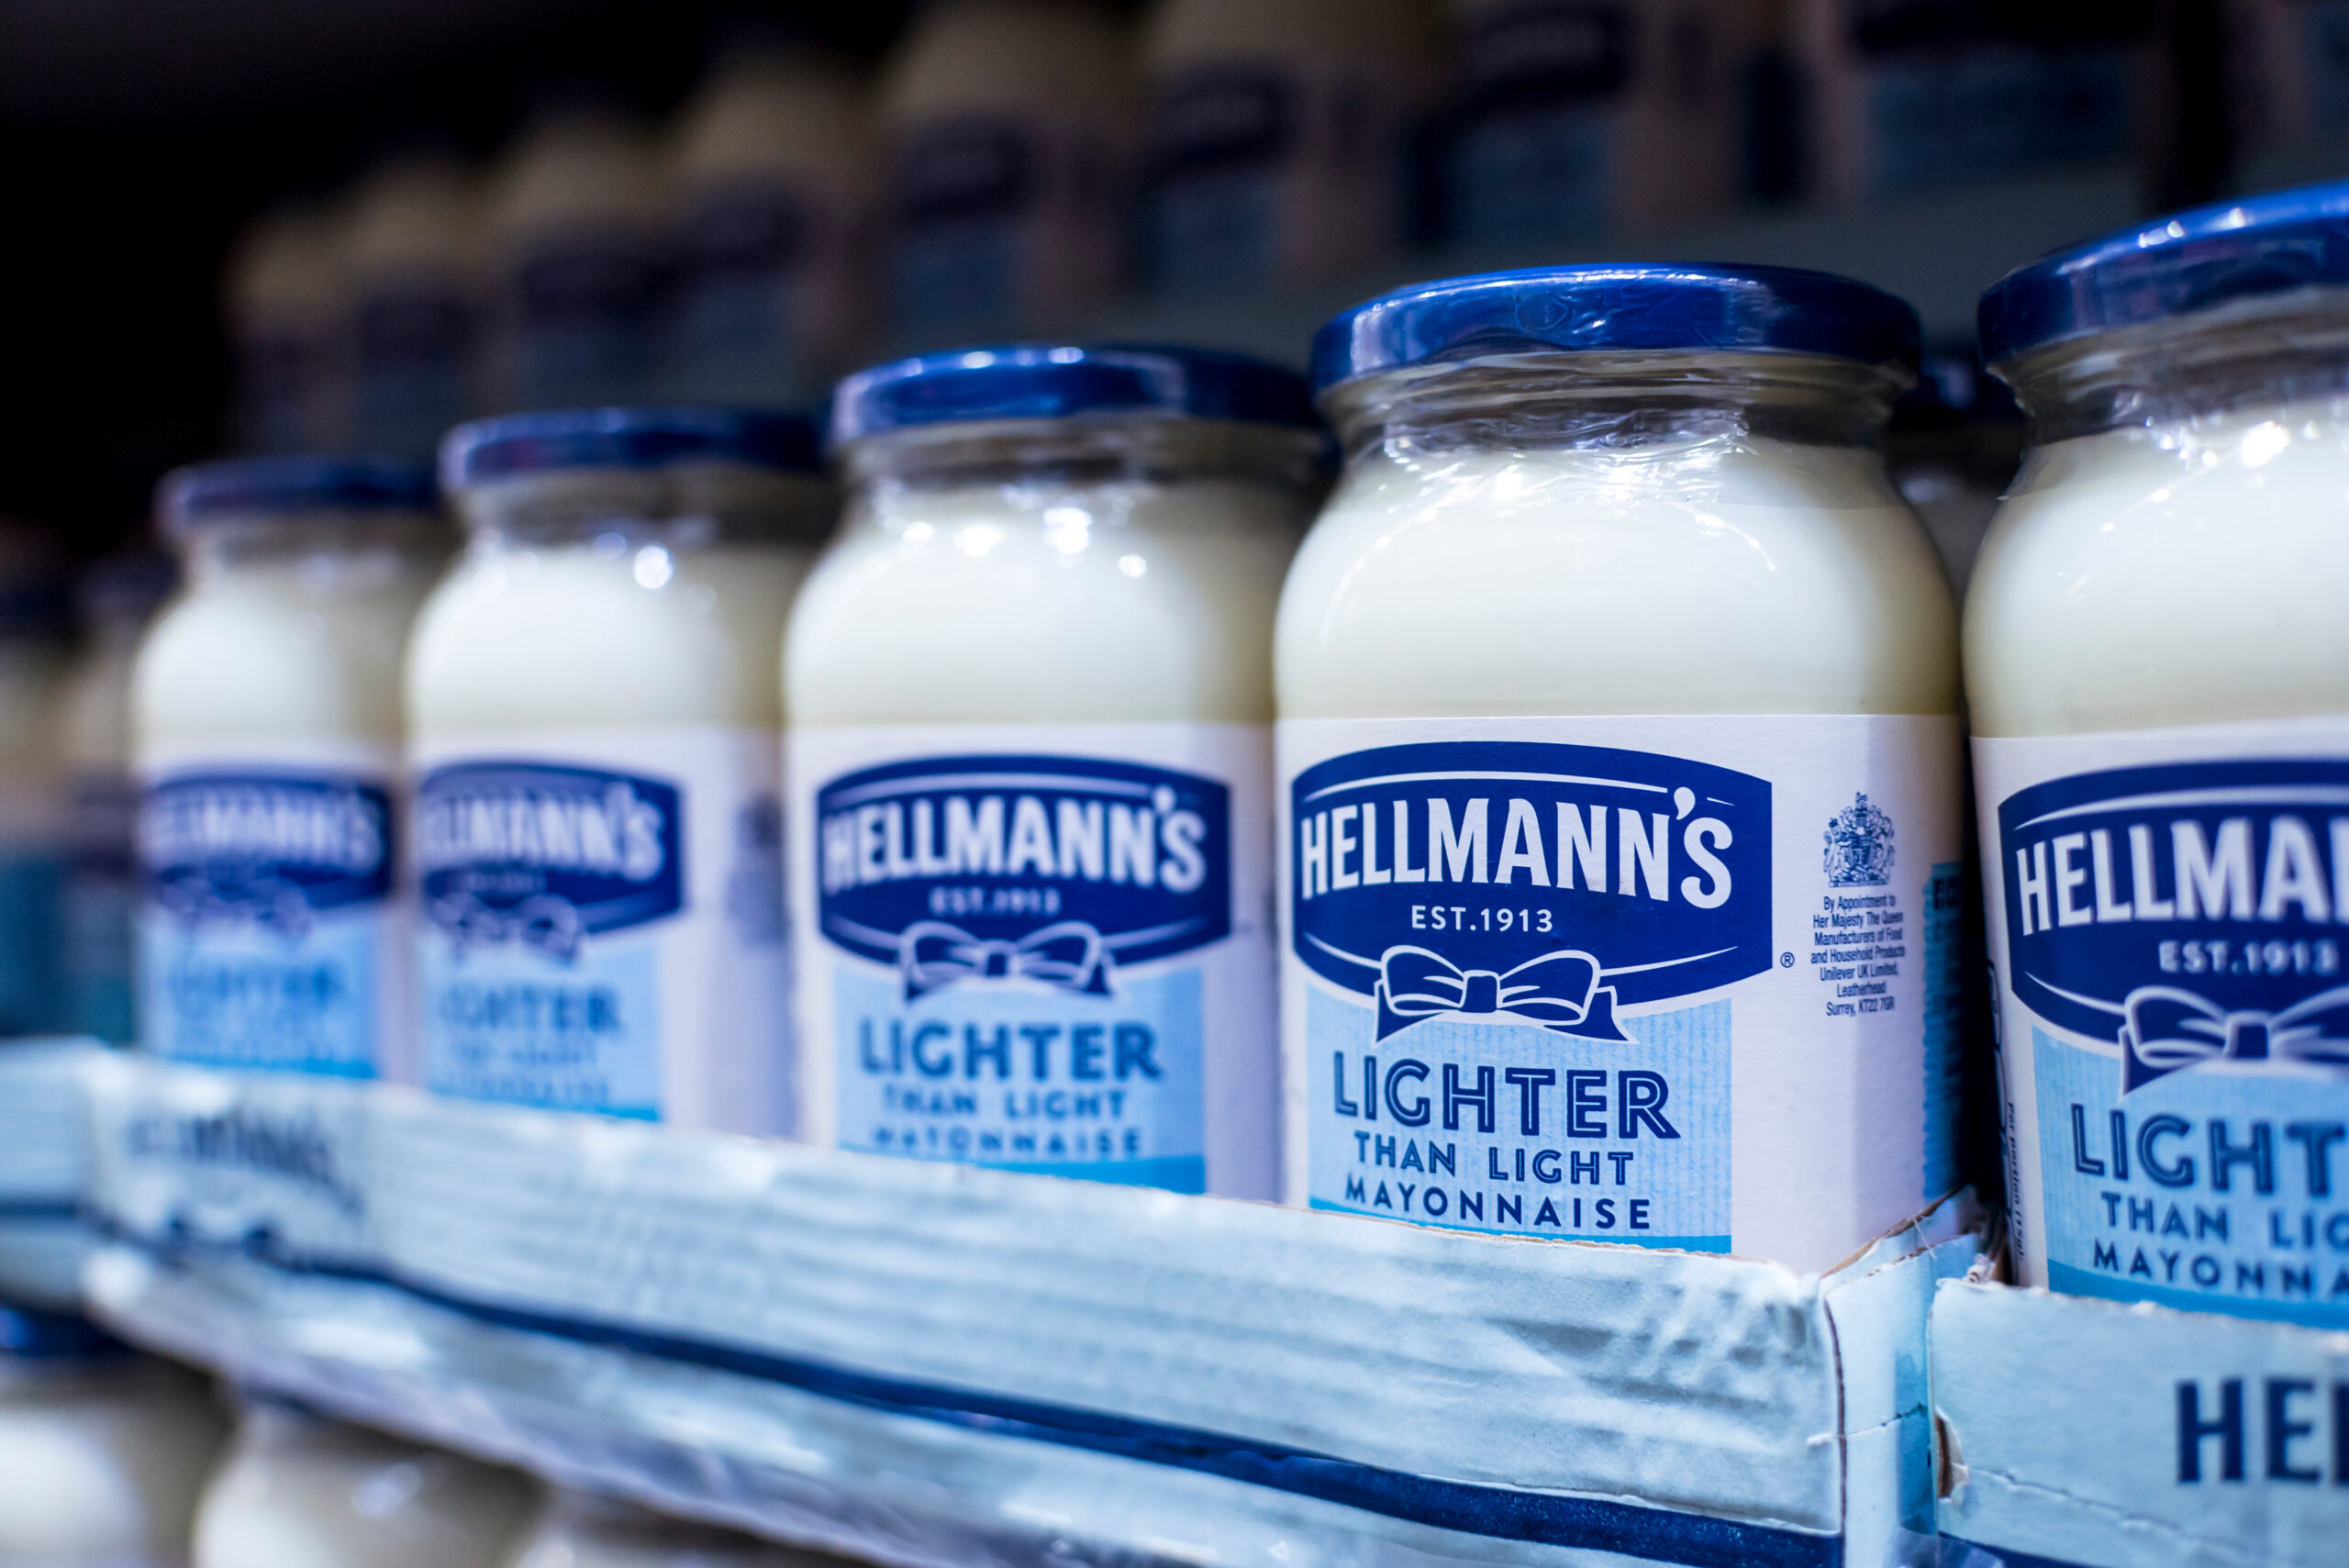 Manila, Philippines - July 2021: Rows of Hellmann's Lighter than